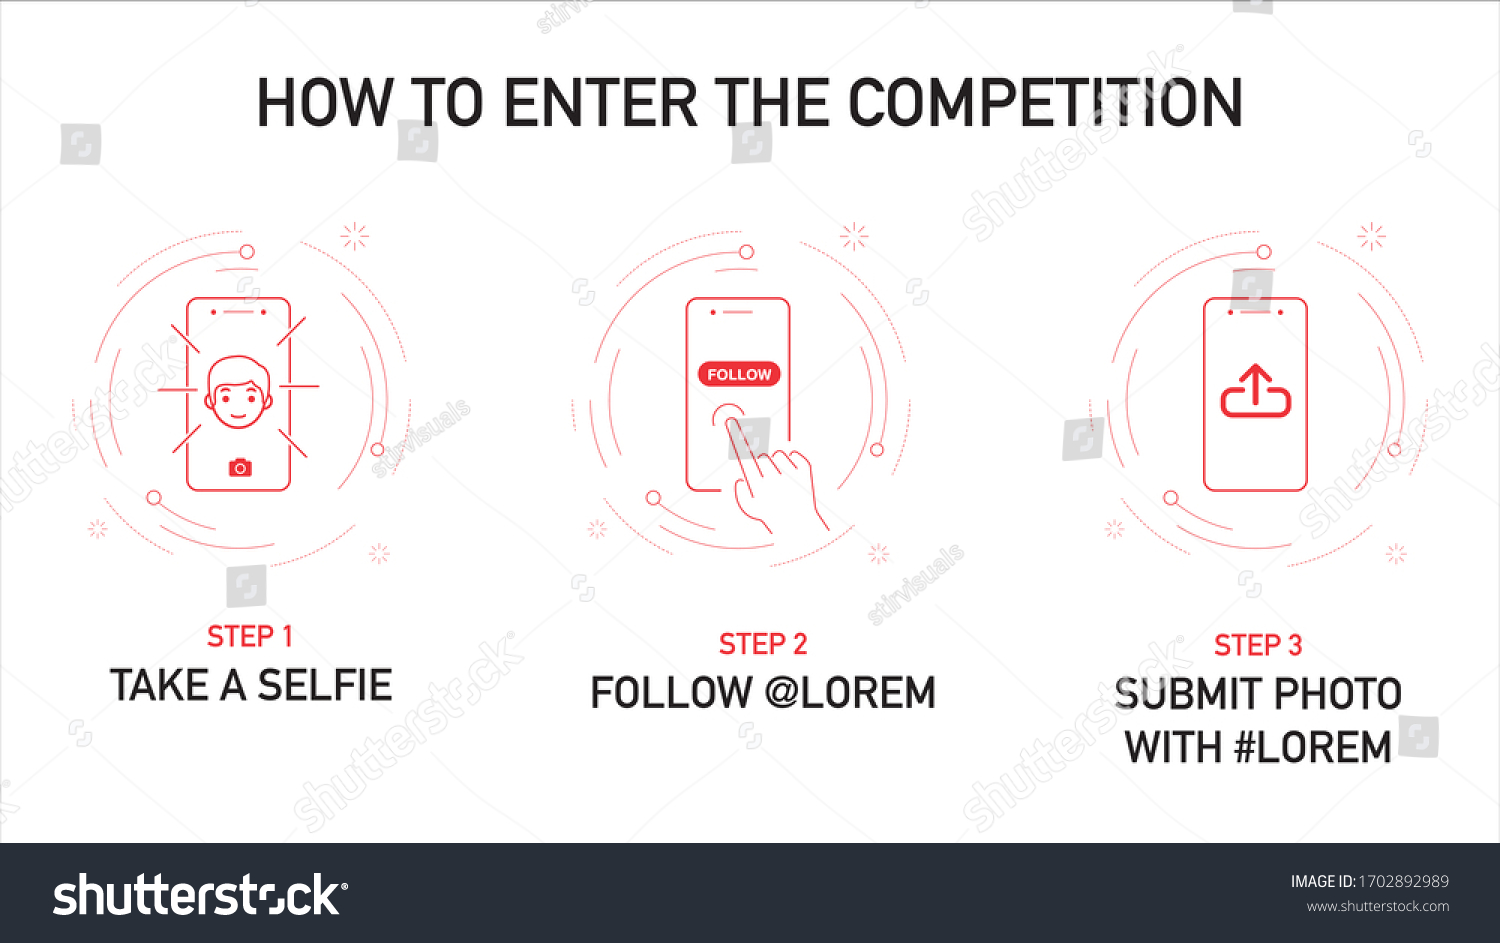 SVG of How to enter the competition steps with icons and vector graphics. Step by steps on how to enter the challenge via mobile - selfie, follow, comment and upload / submit - Vector Illustration svg